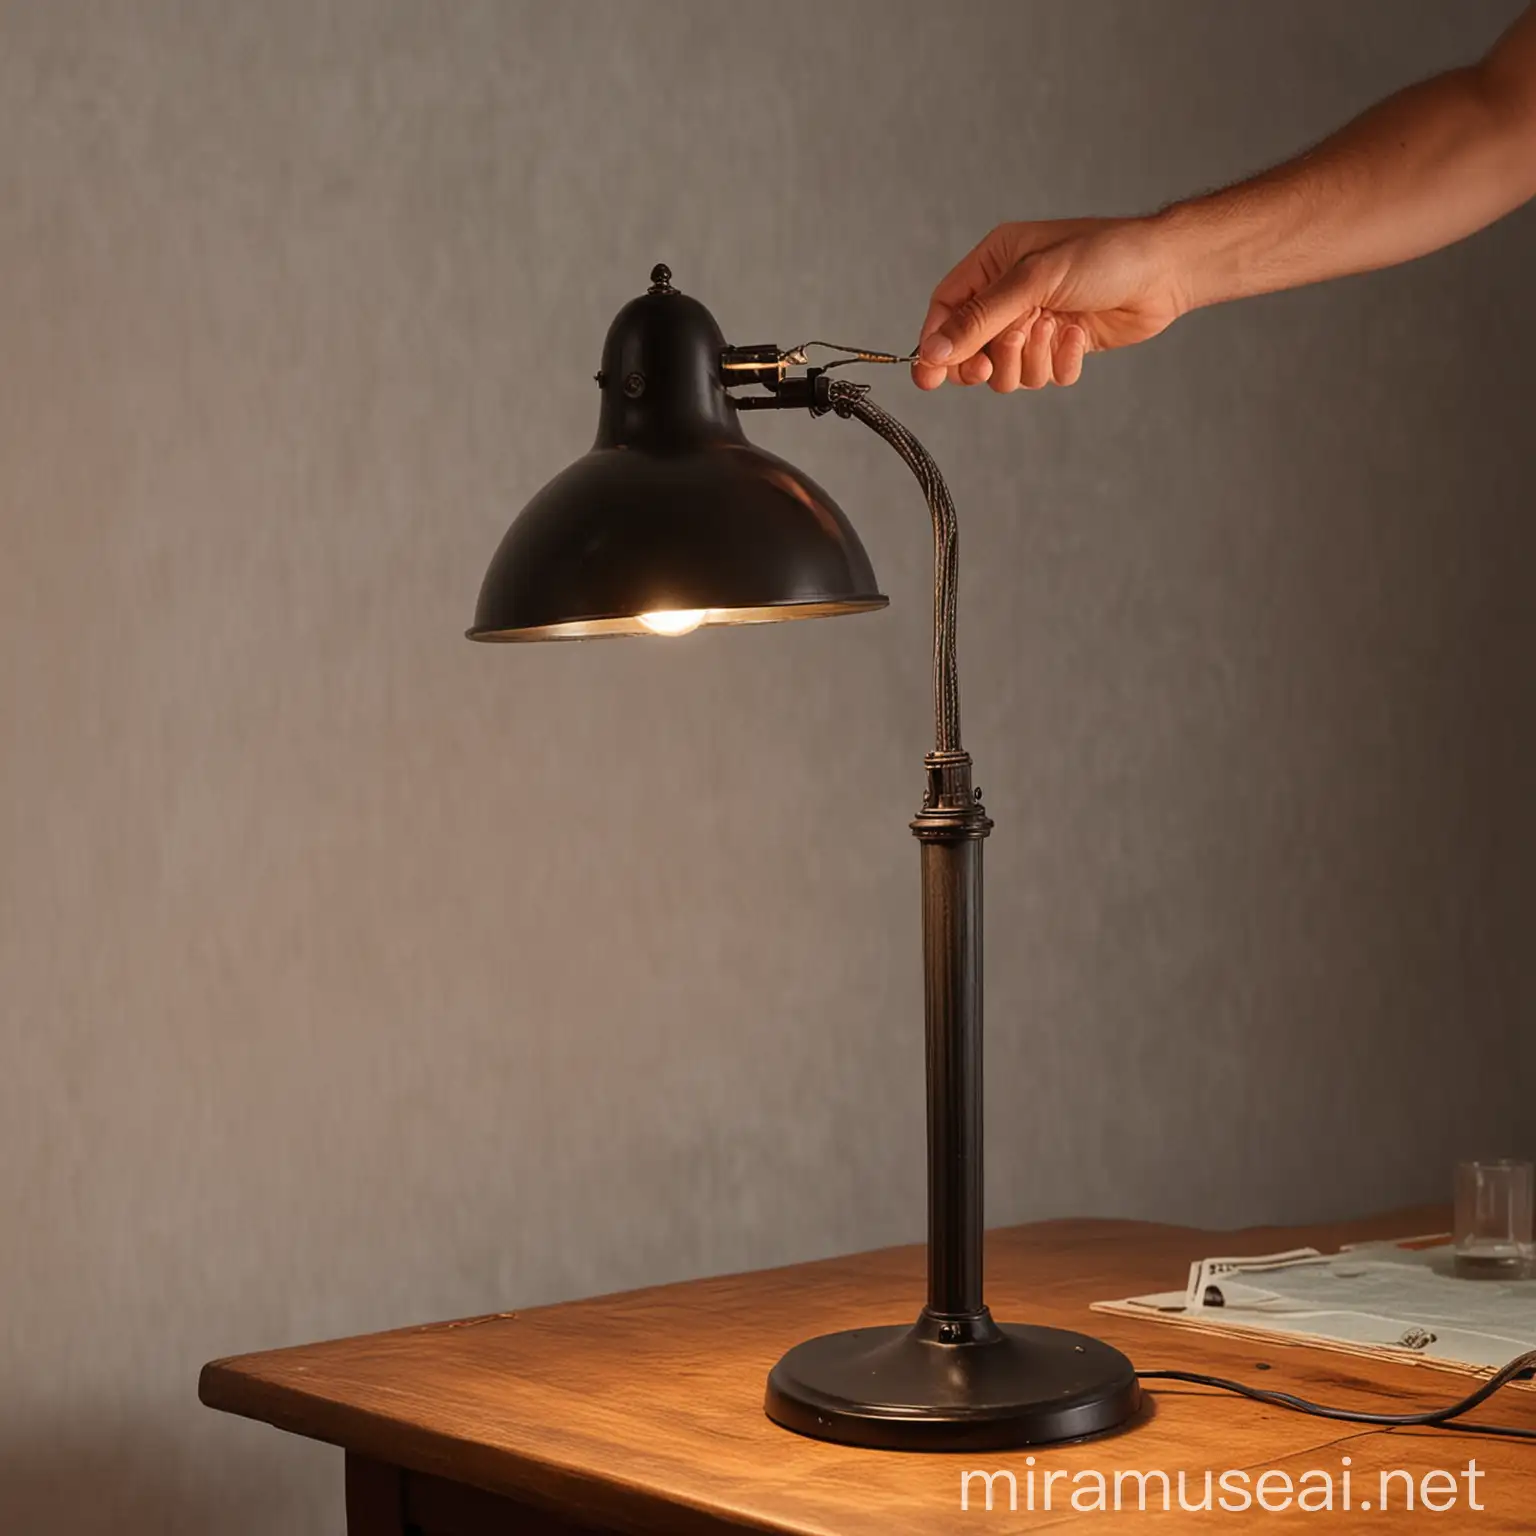 Lamp Positioning on Table Interior Design Tips for Perfect Lighting Placement